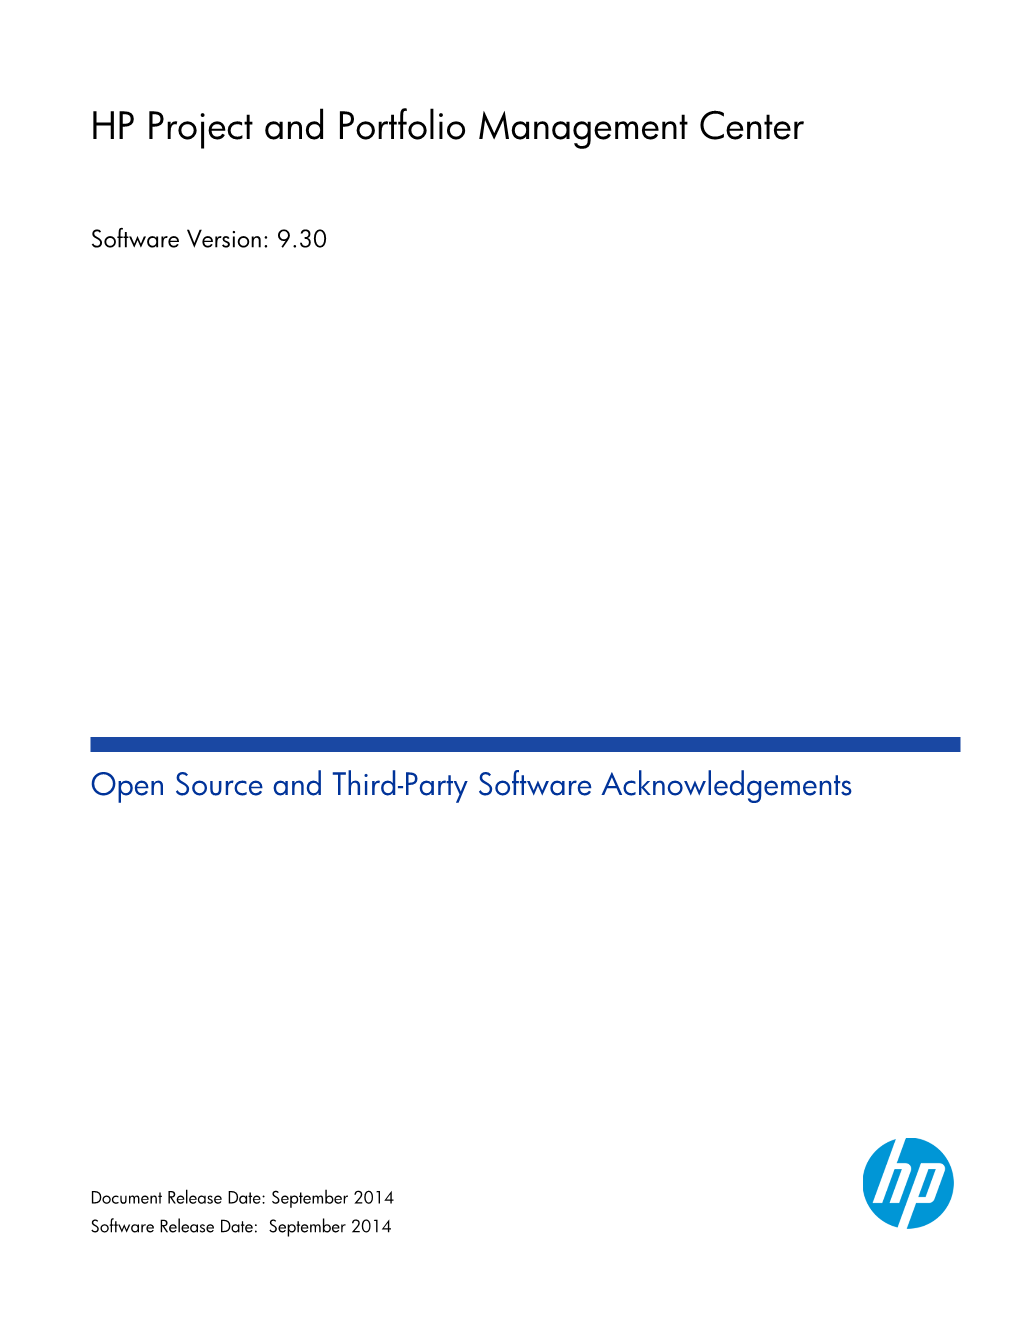 HP PPM Center 9.10 Third Party and Open Source Acknowledgements